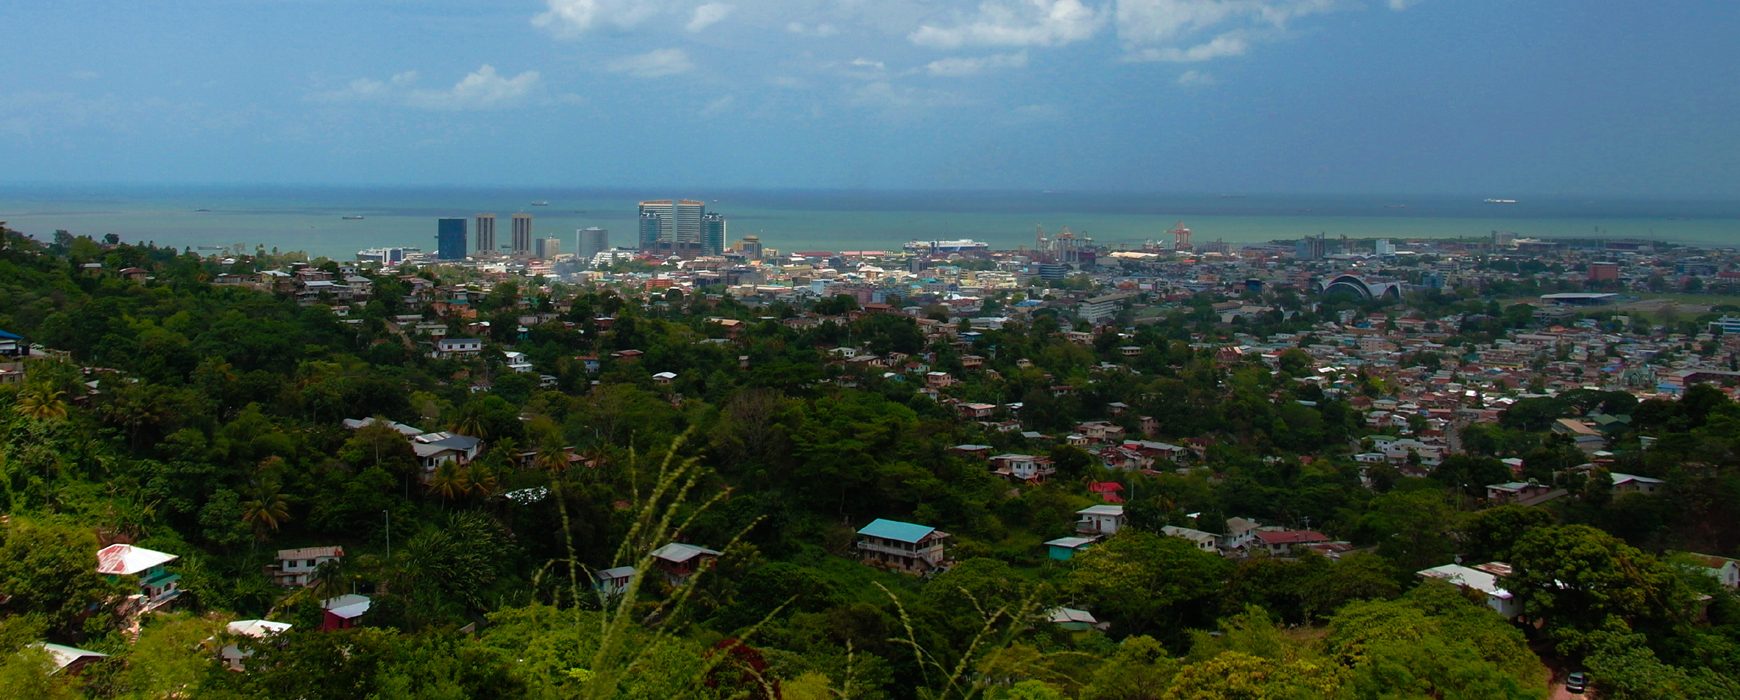 A new land project in Trinidad and Tobago